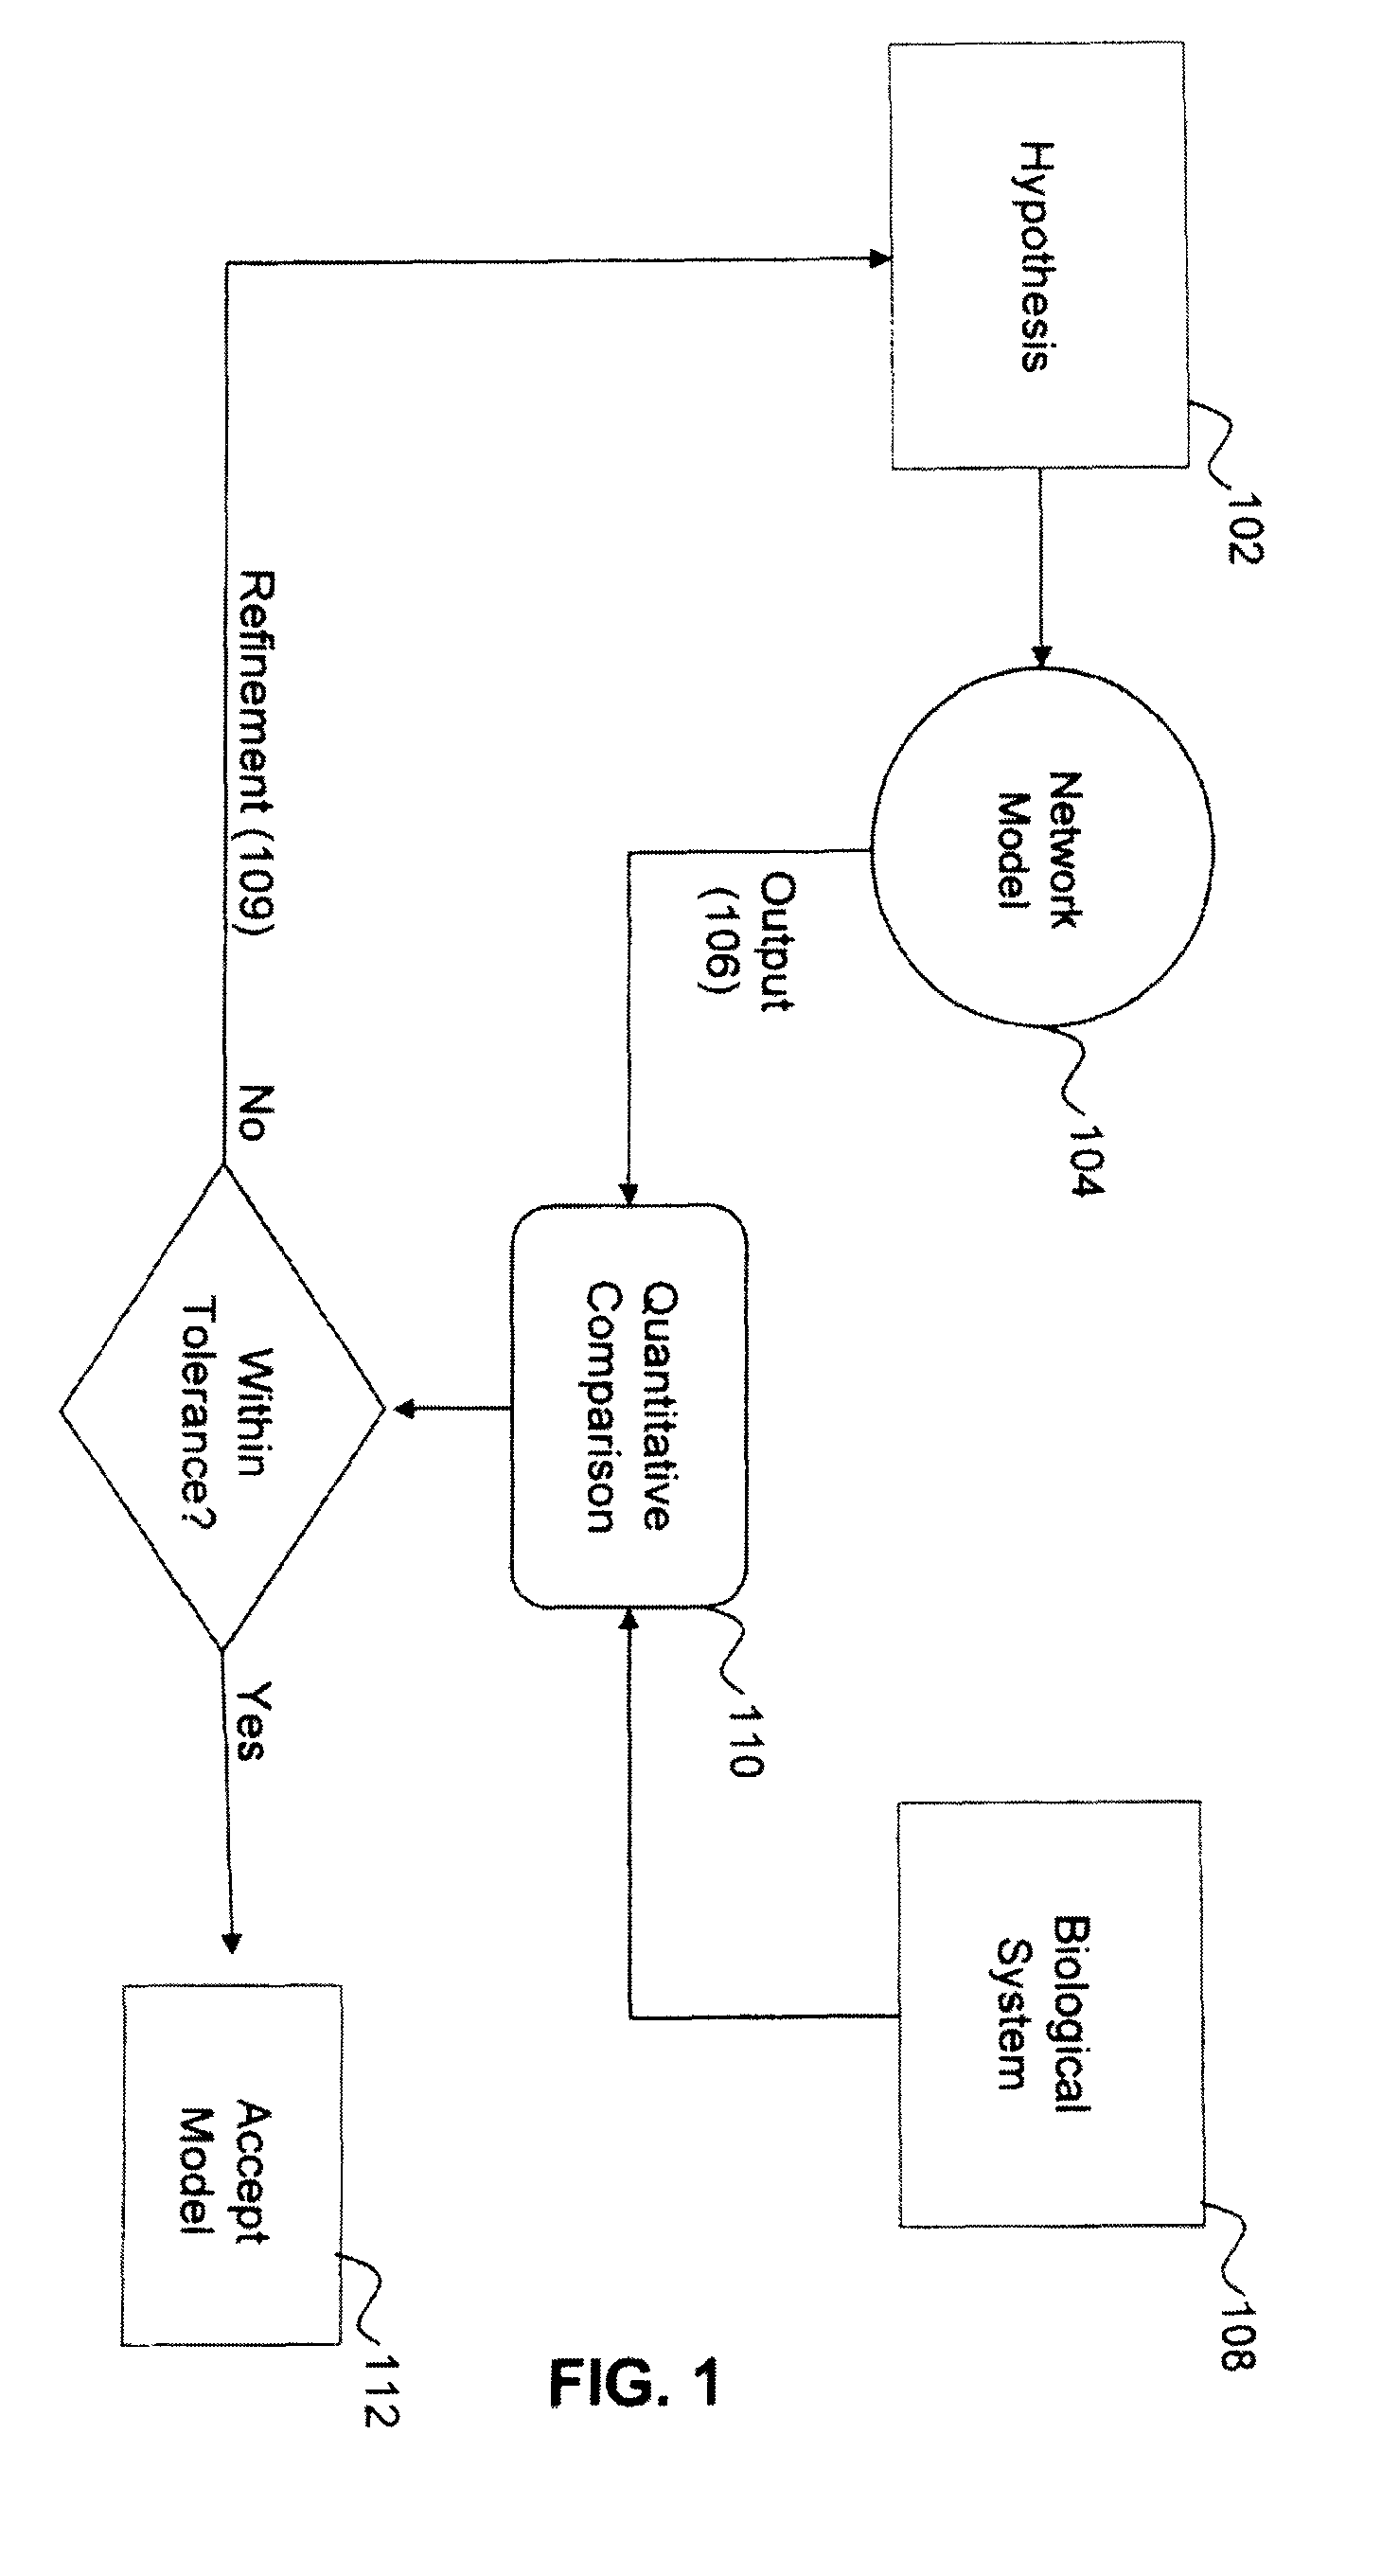 Methods and systems for drug screening and computational modeling based on biologically realistic neurons